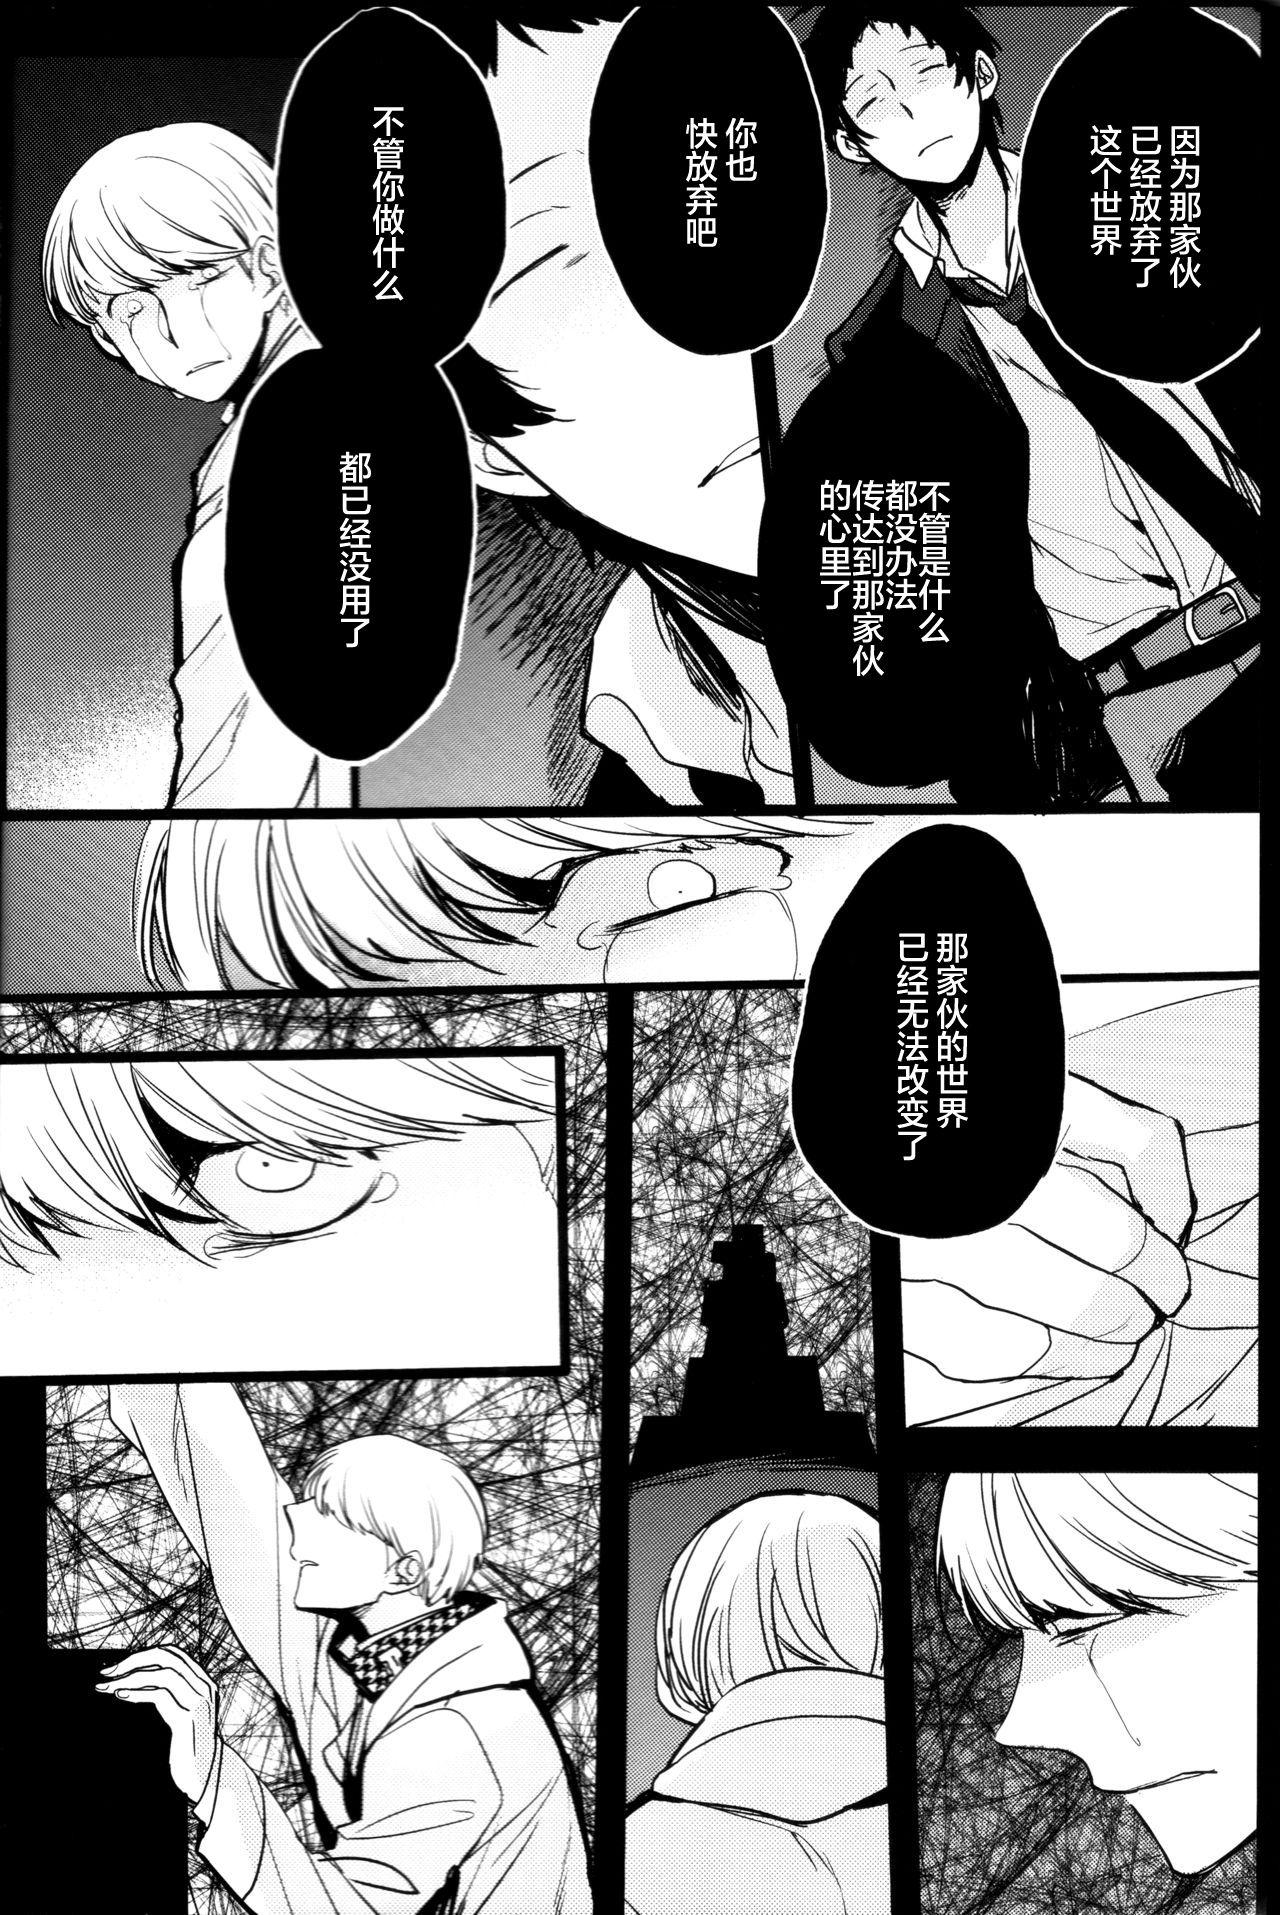 Clitoris The End Of The World Volume 3 - Persona 4 Balls - Page 8